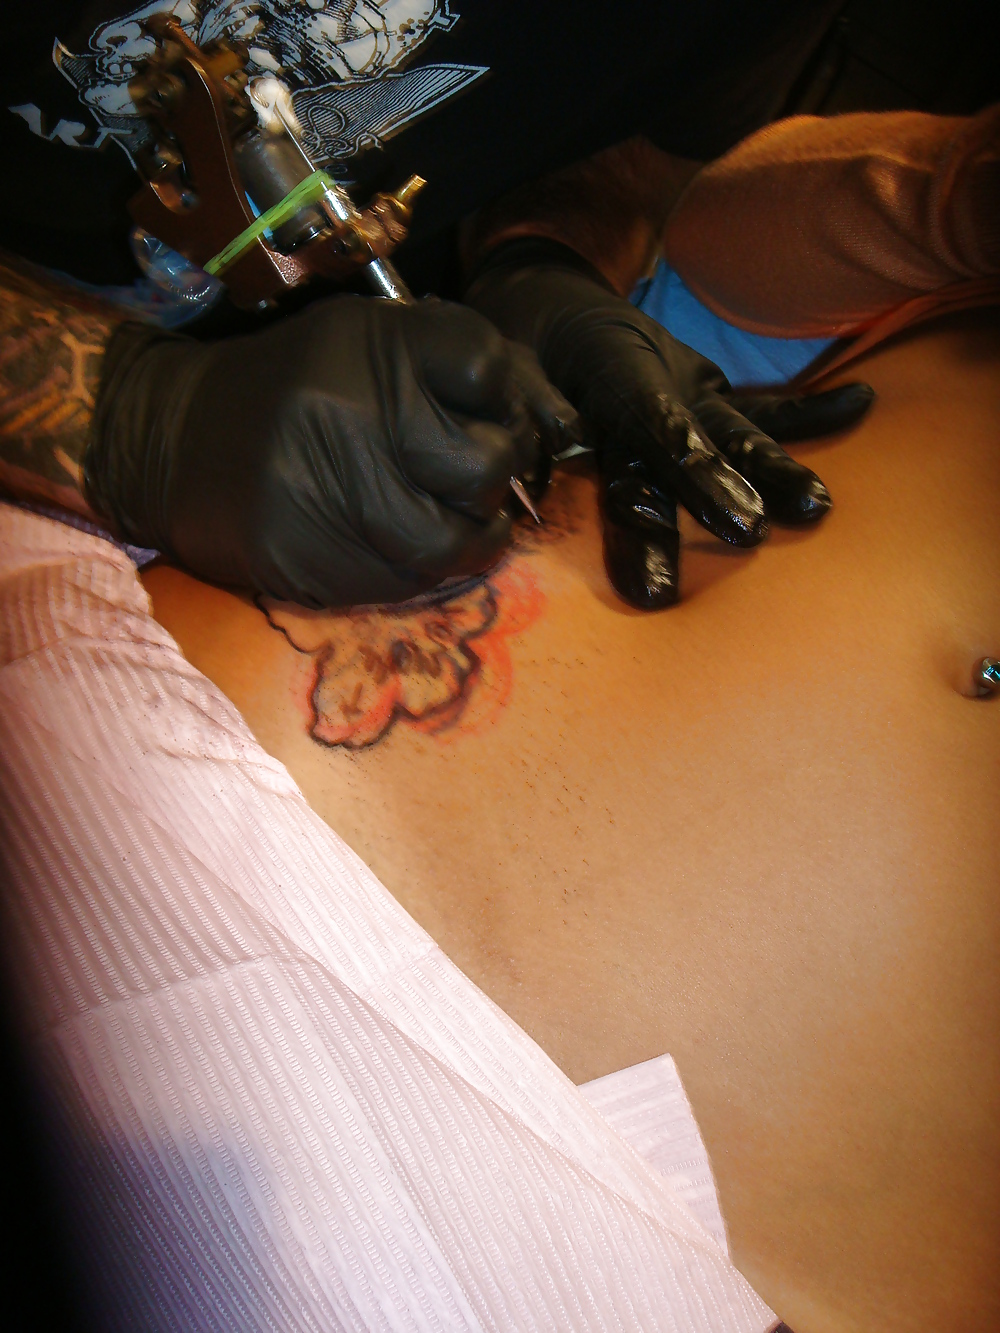 XXX Girl getting tattooed and fucked